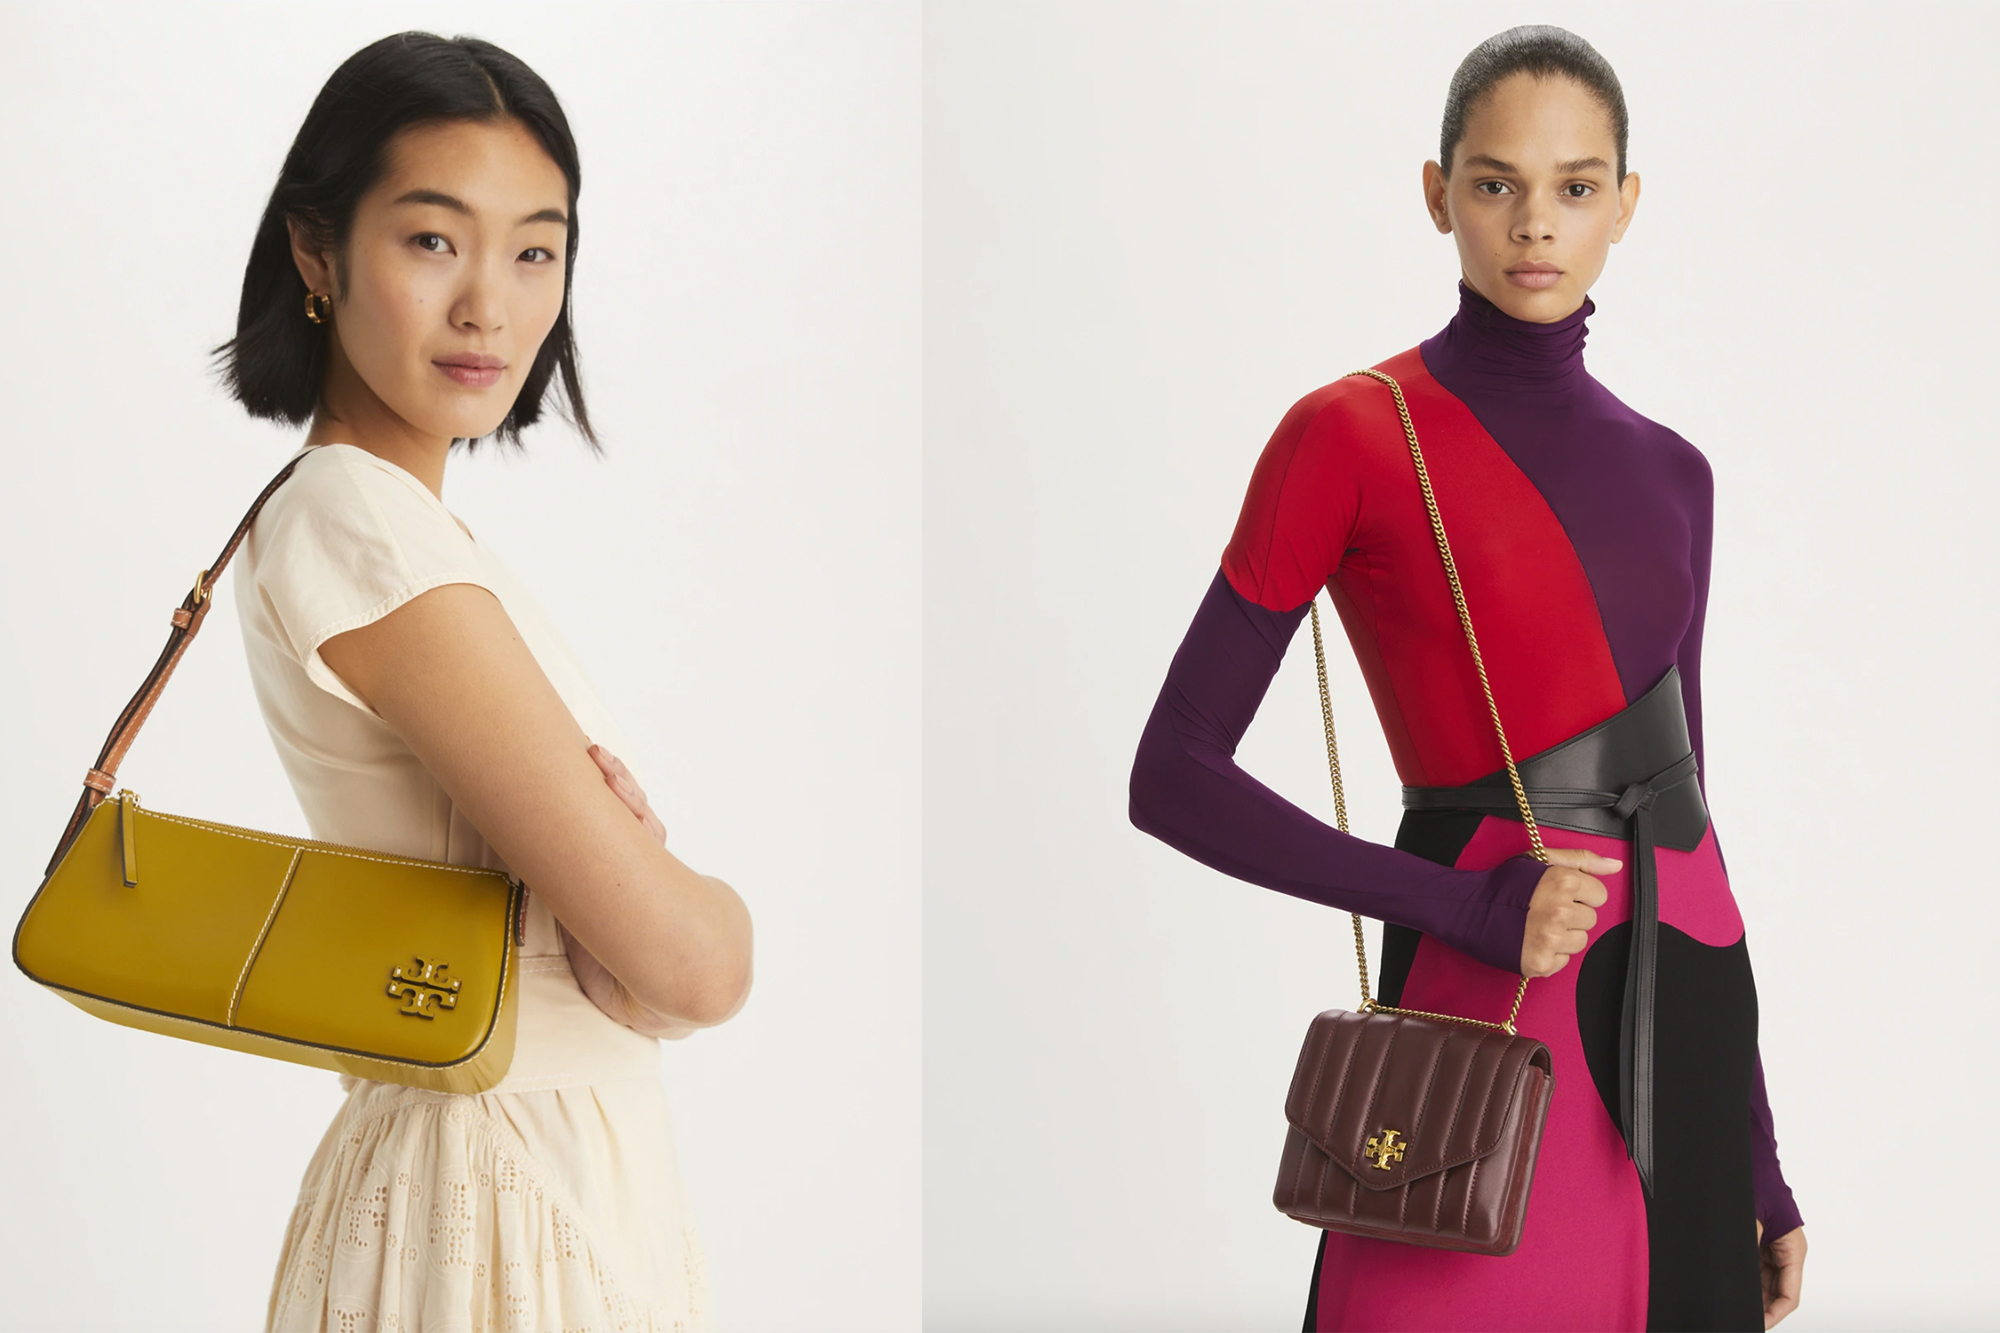 Zulily launches markdowns on Tory Burch handbags, accessories